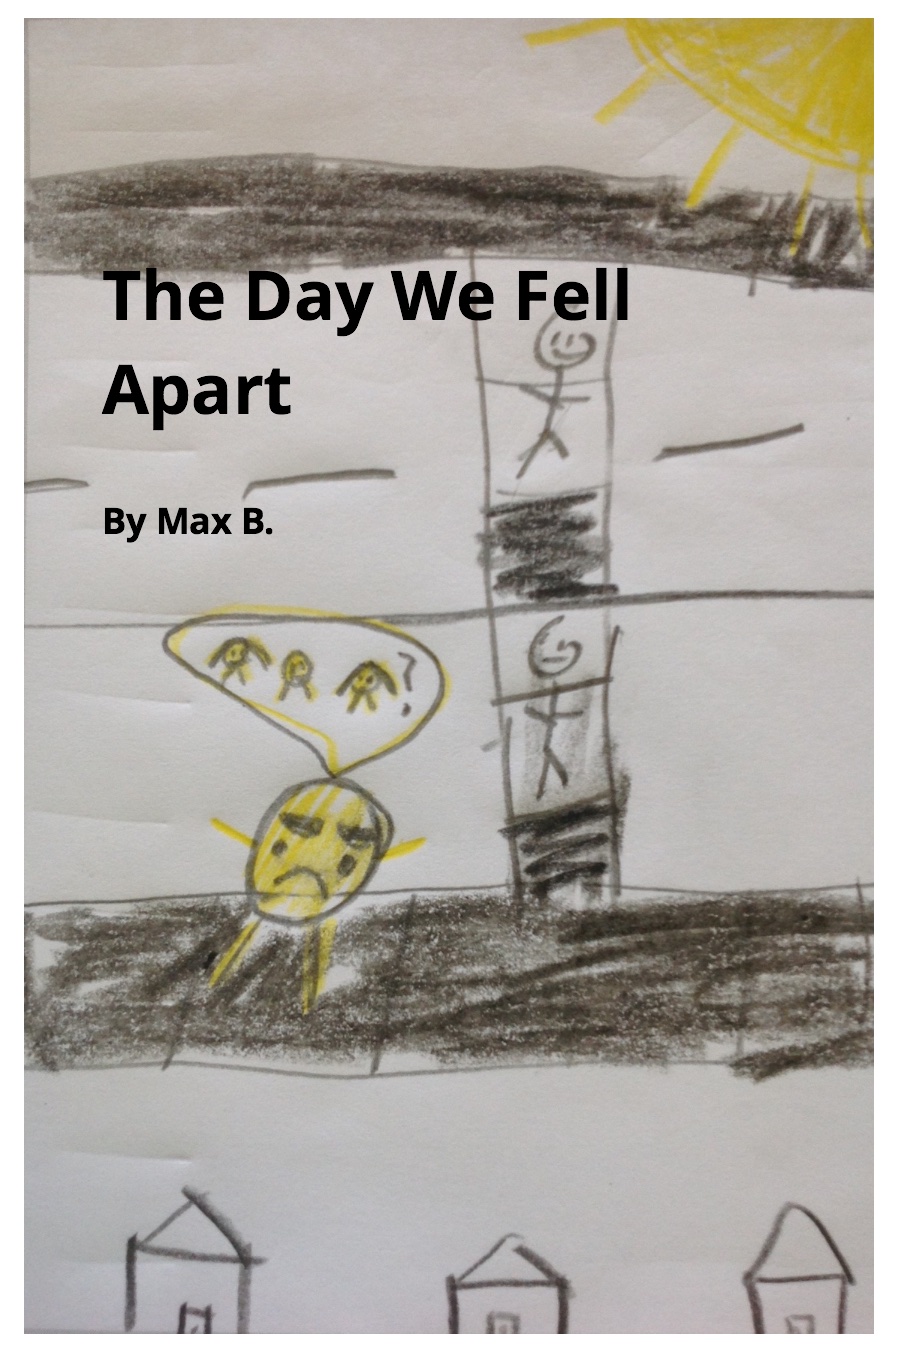 The Day We Fell Apart by Max B